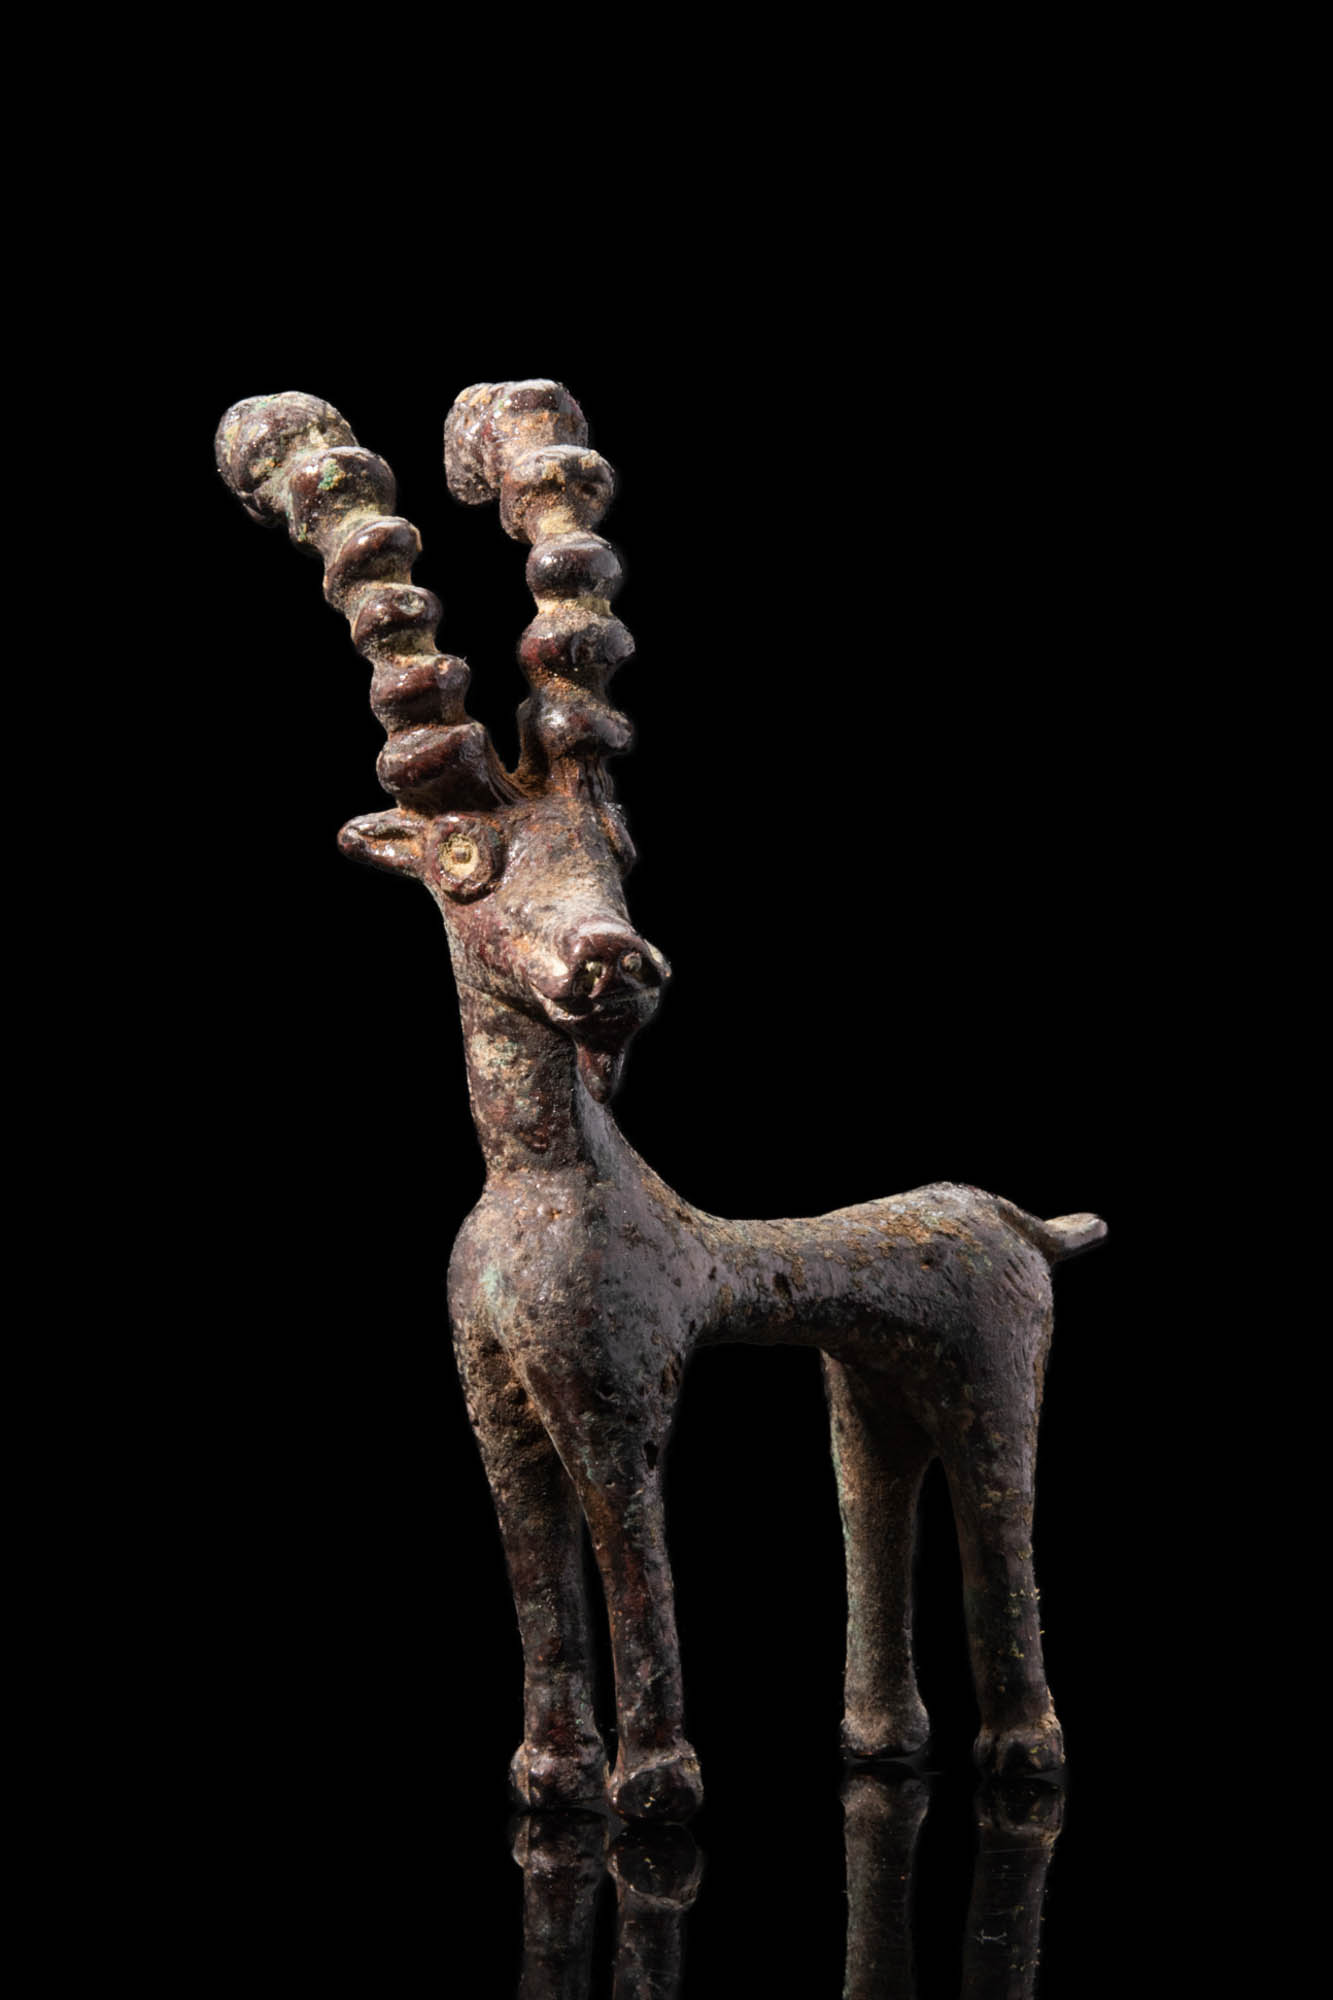 LARGE WESTERN ASIATIC BRONZE IBEX FIGURINE WITH INLAID EYES - Image 2 of 4